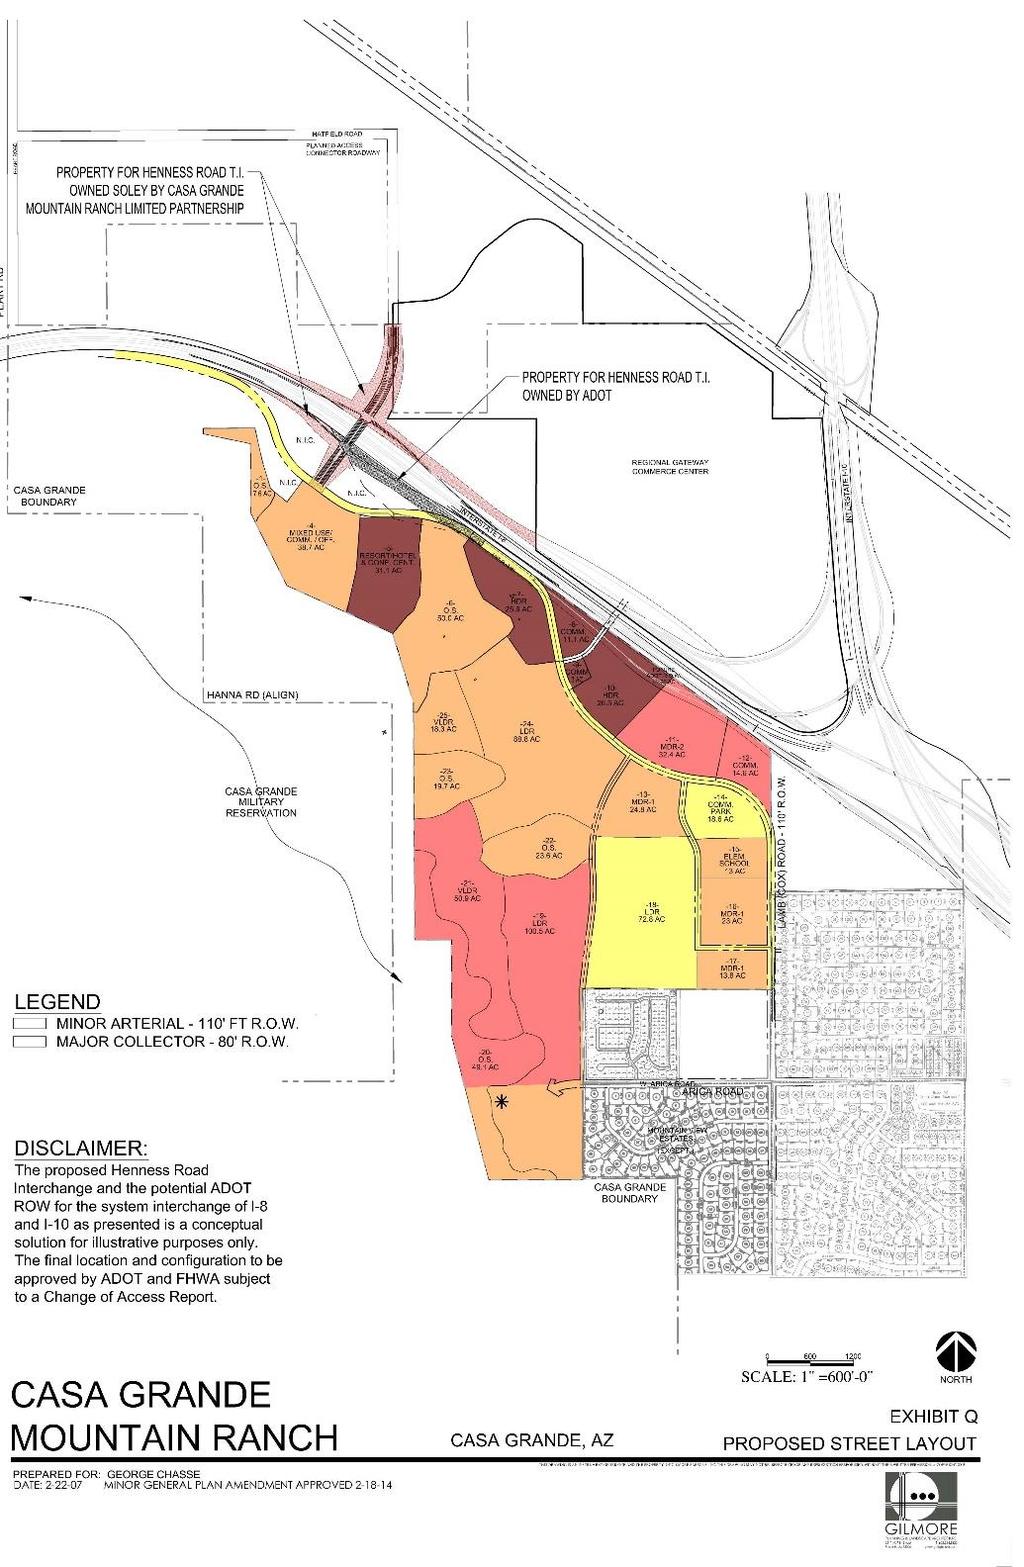 Casa Grande Mountain Ranch Master Land Use Plan Previous Zoning CITY APPROVED: March 11, 2014 RESORT SITE A 31 acre resort site located at the north foothills of Casa Grande Mountain is identified in